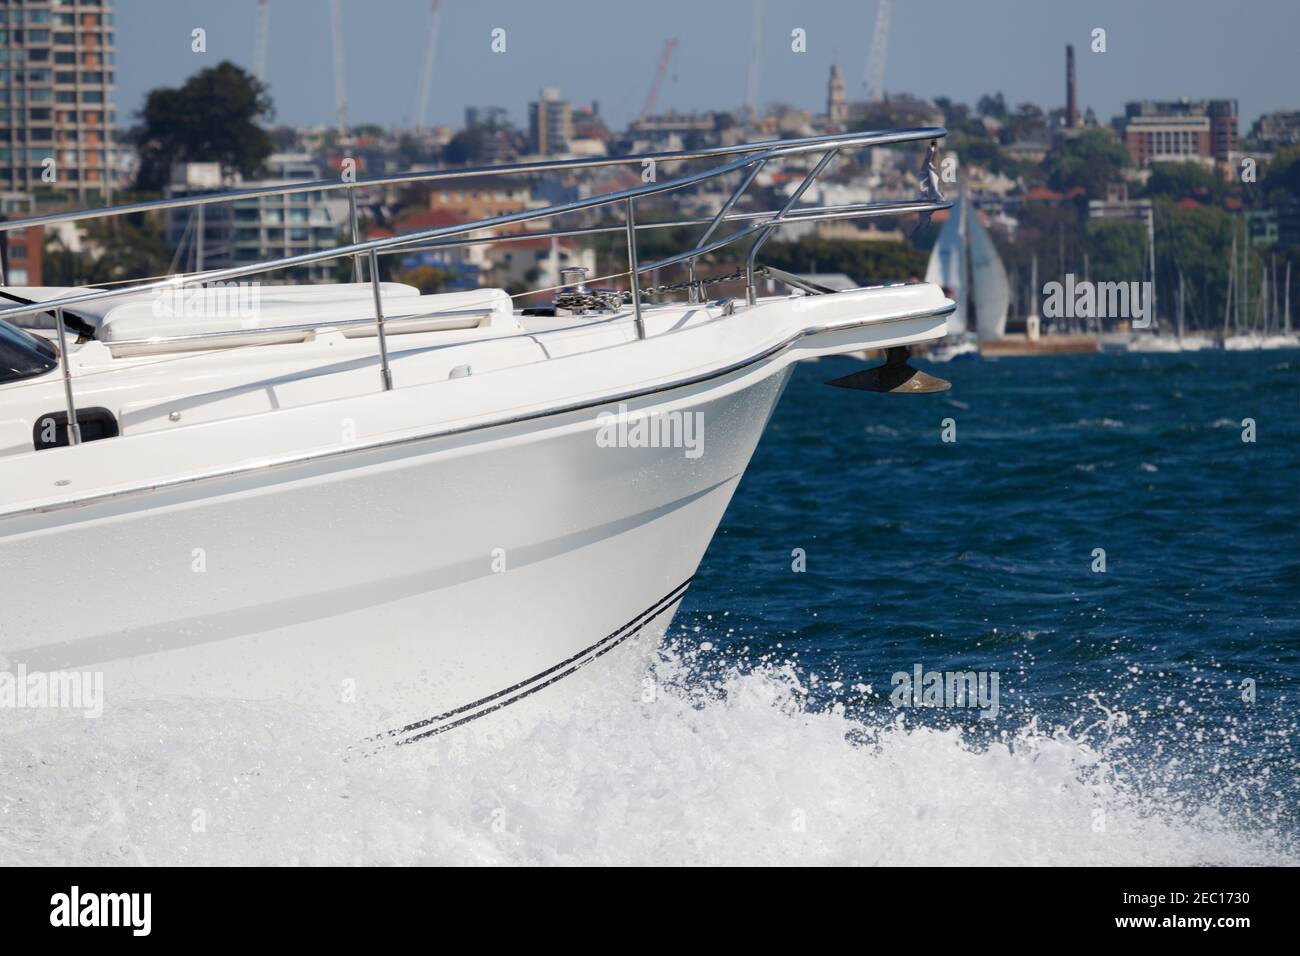 A motorboat passes by. Waves splashing. Partial view of the bow of the boat Stock Photo